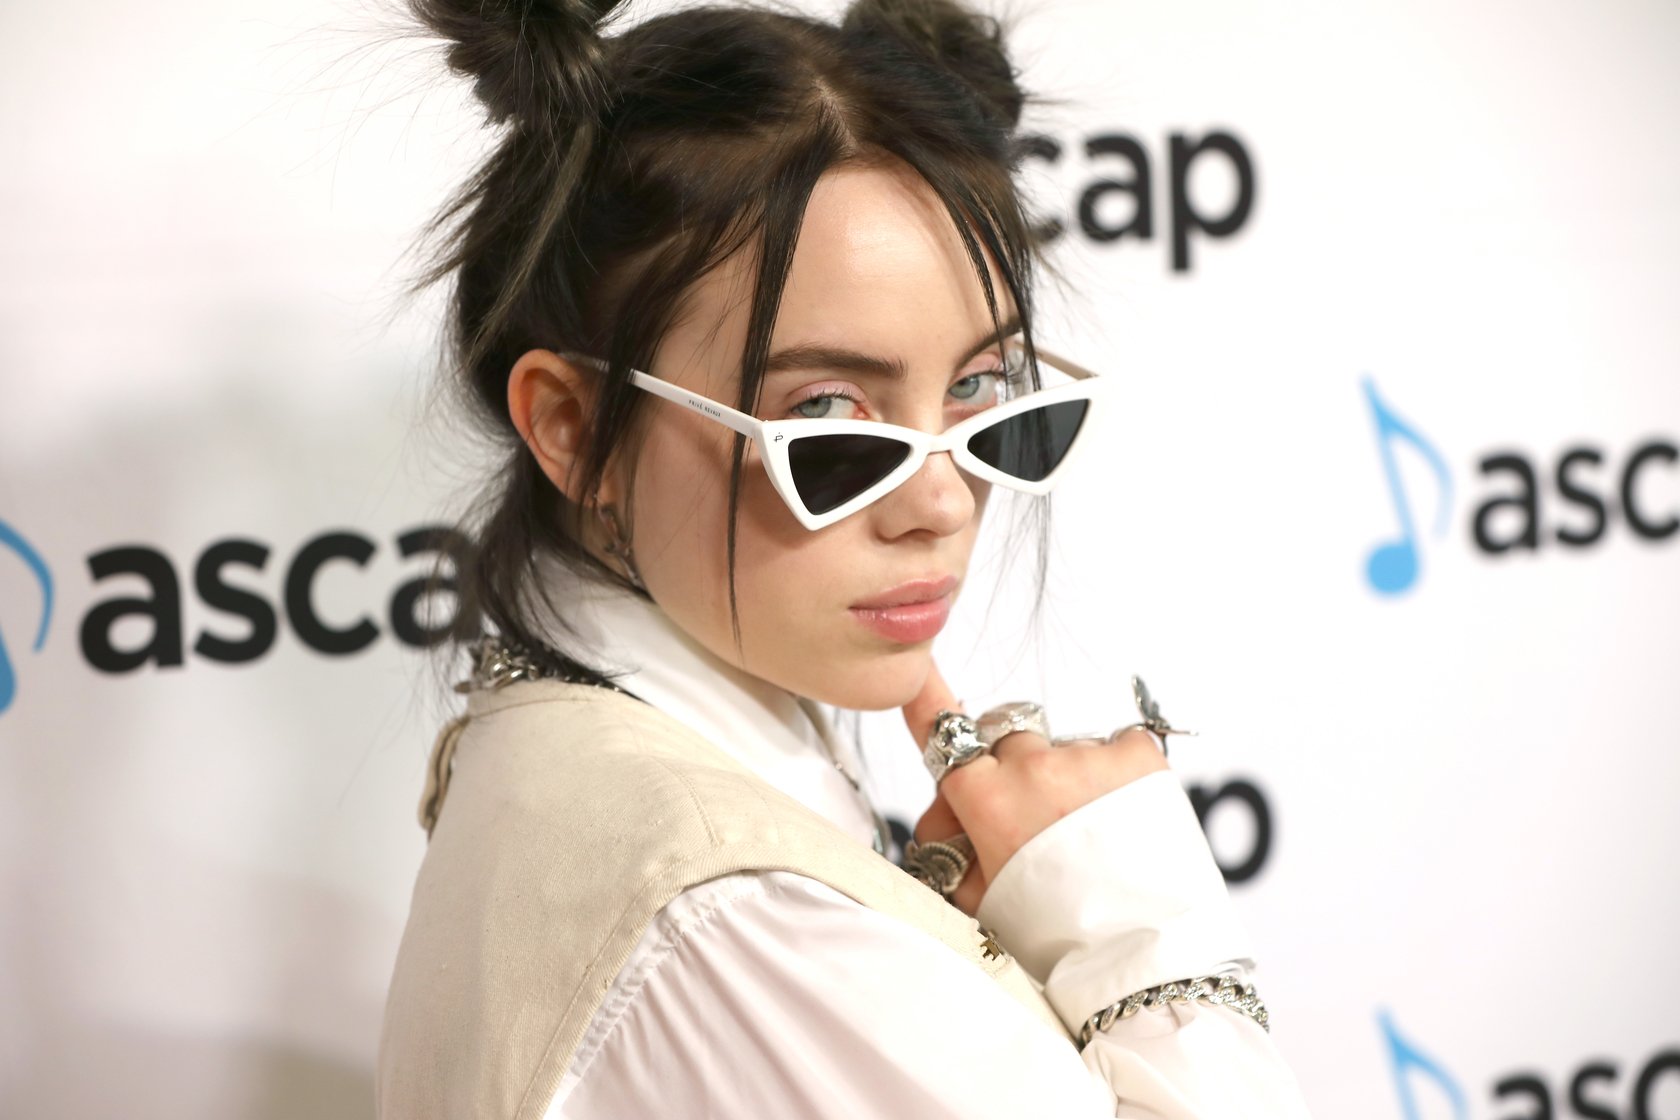 Billie Eilish attends the ASCAP 2019 Pop Music Awards at The Beverly Hilton Hotel on May 16, 2019 | Photo: Getty Images